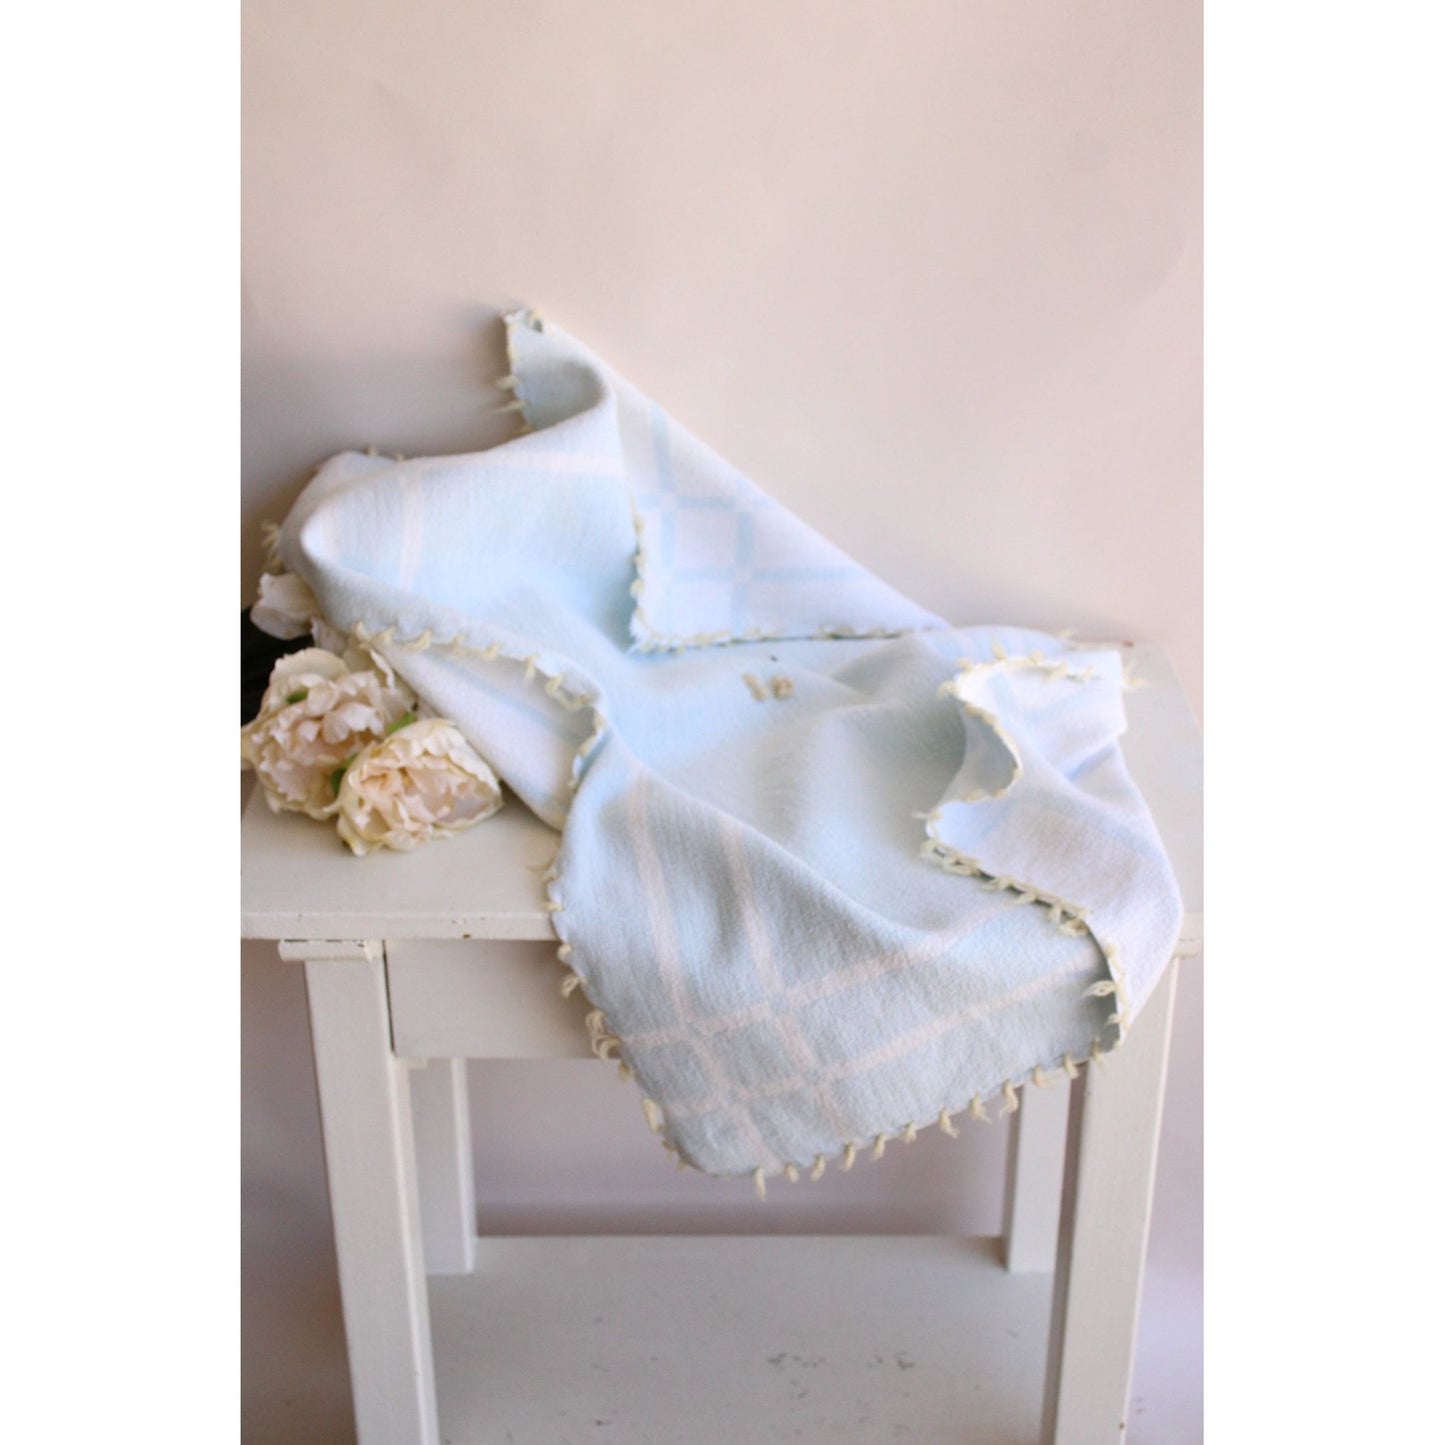 Vintage 1930s 1940s Baby Blanket Or Throw by Baby Pepperell